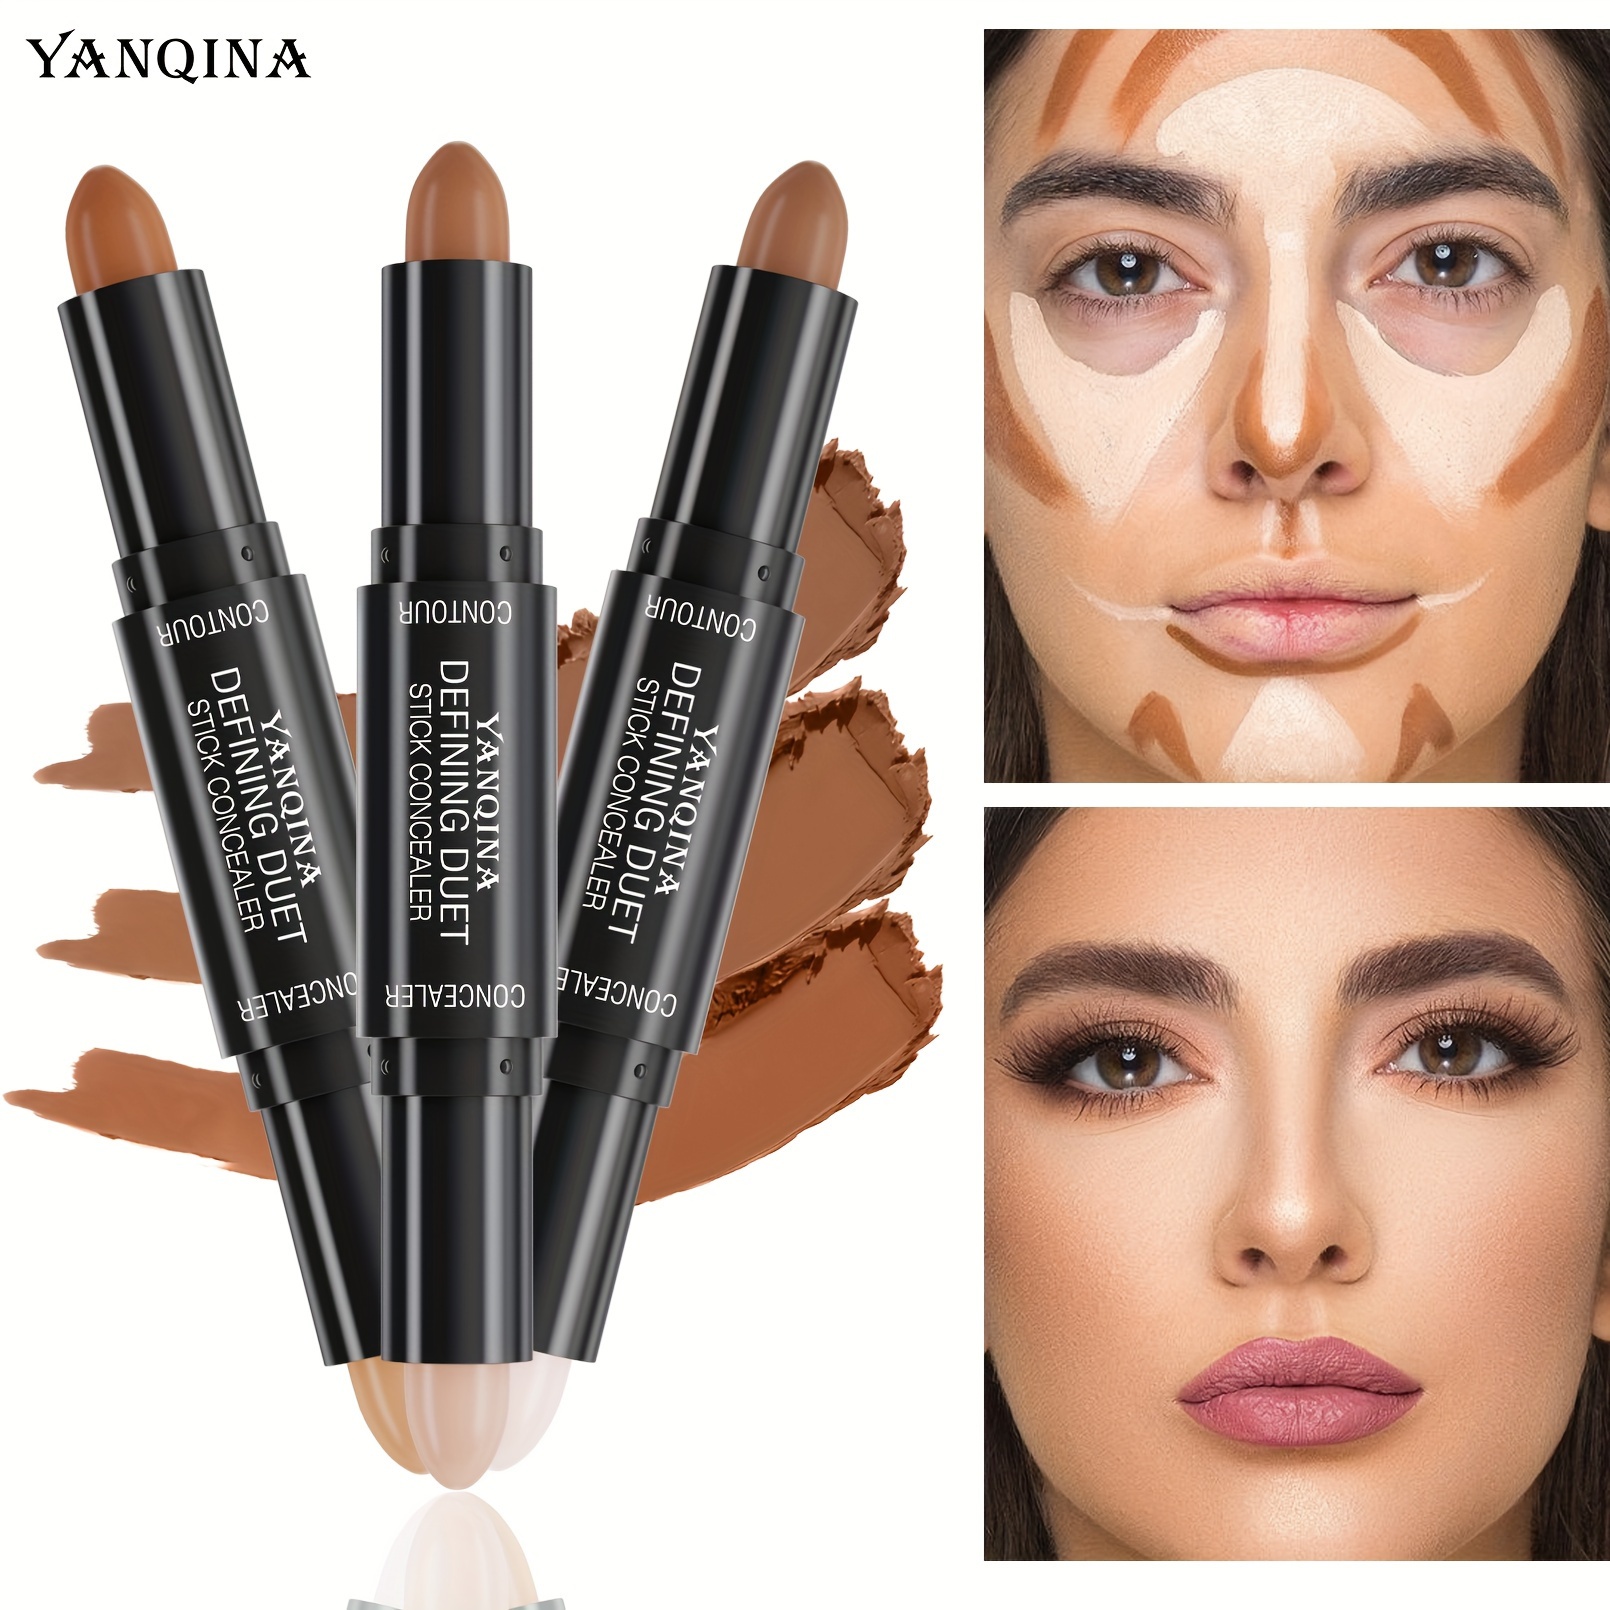 

2 In 1 Body Makeup Shading Stick Foundation Cream Concealer Stick, Highlight Contour Stick, Professional Double Head Facial Highlighting Shade Foundation Makeup